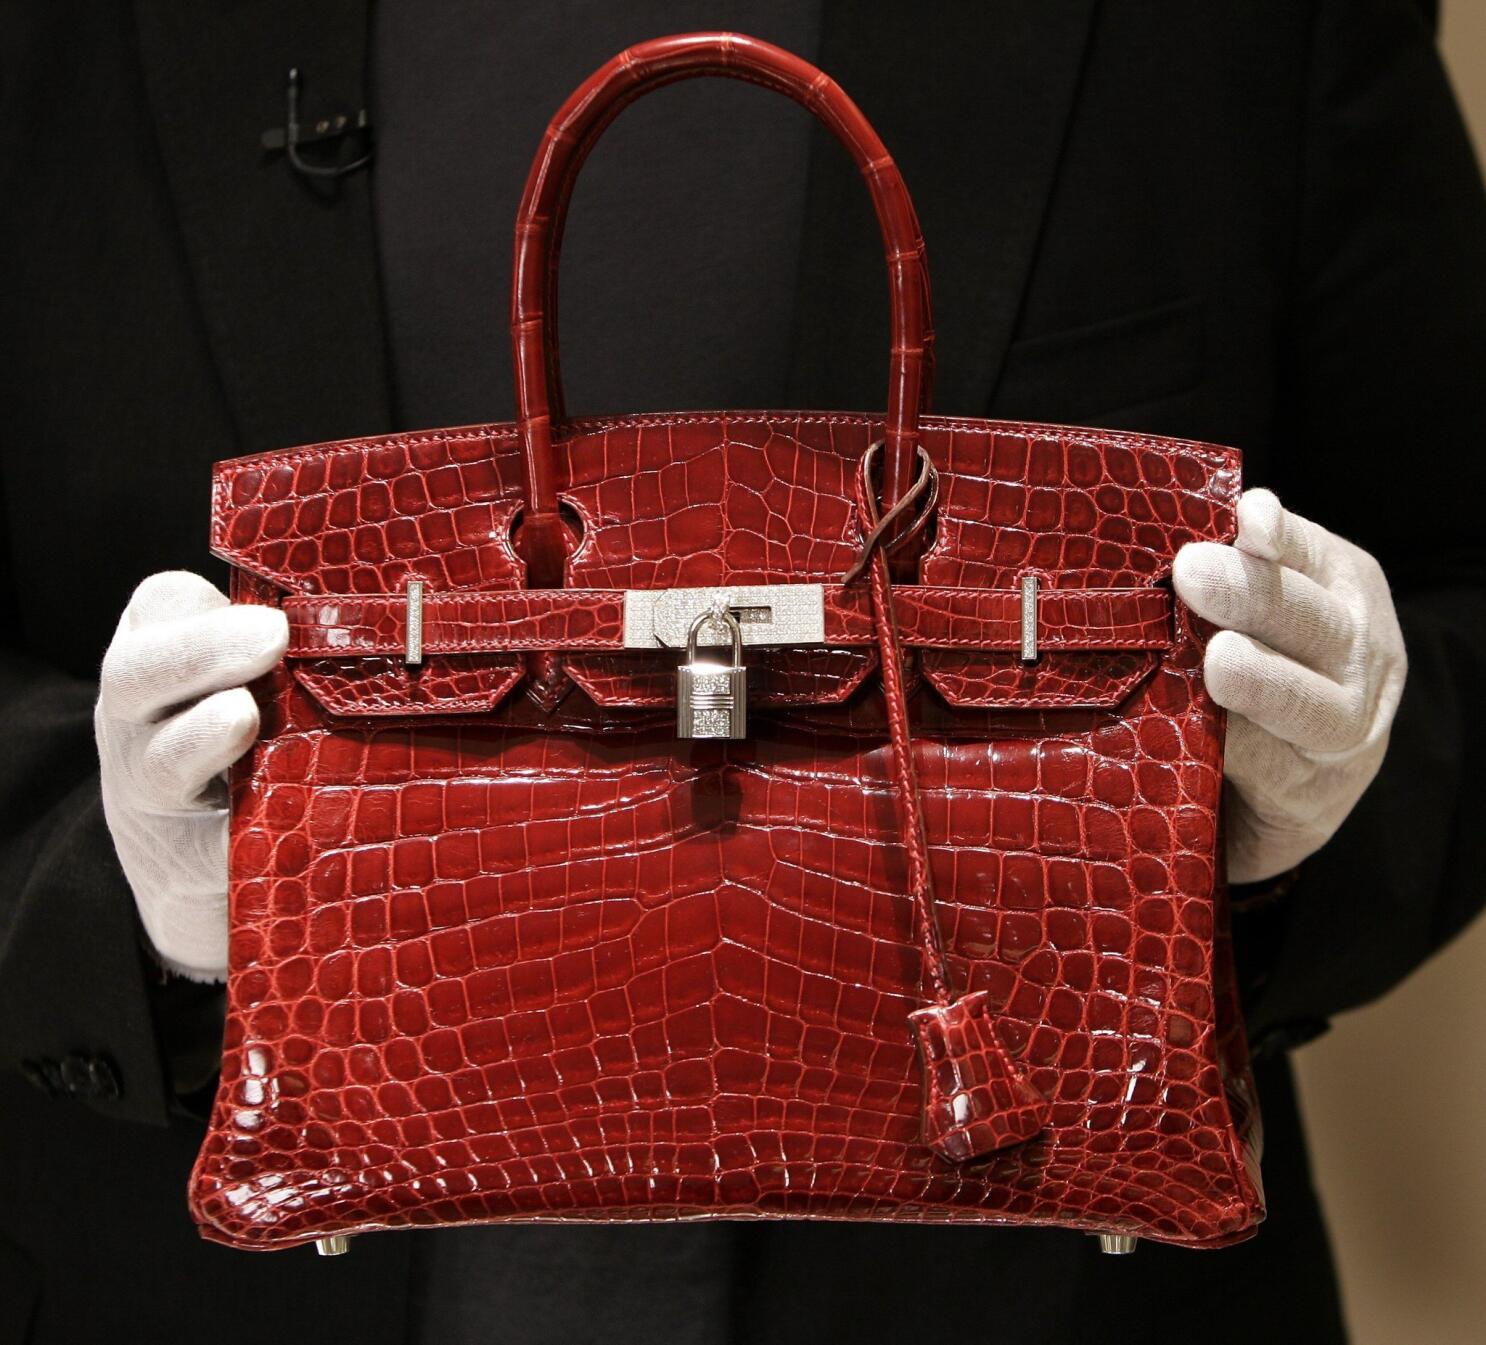 The Most Coveted Handbags Spotted at Fashion Week